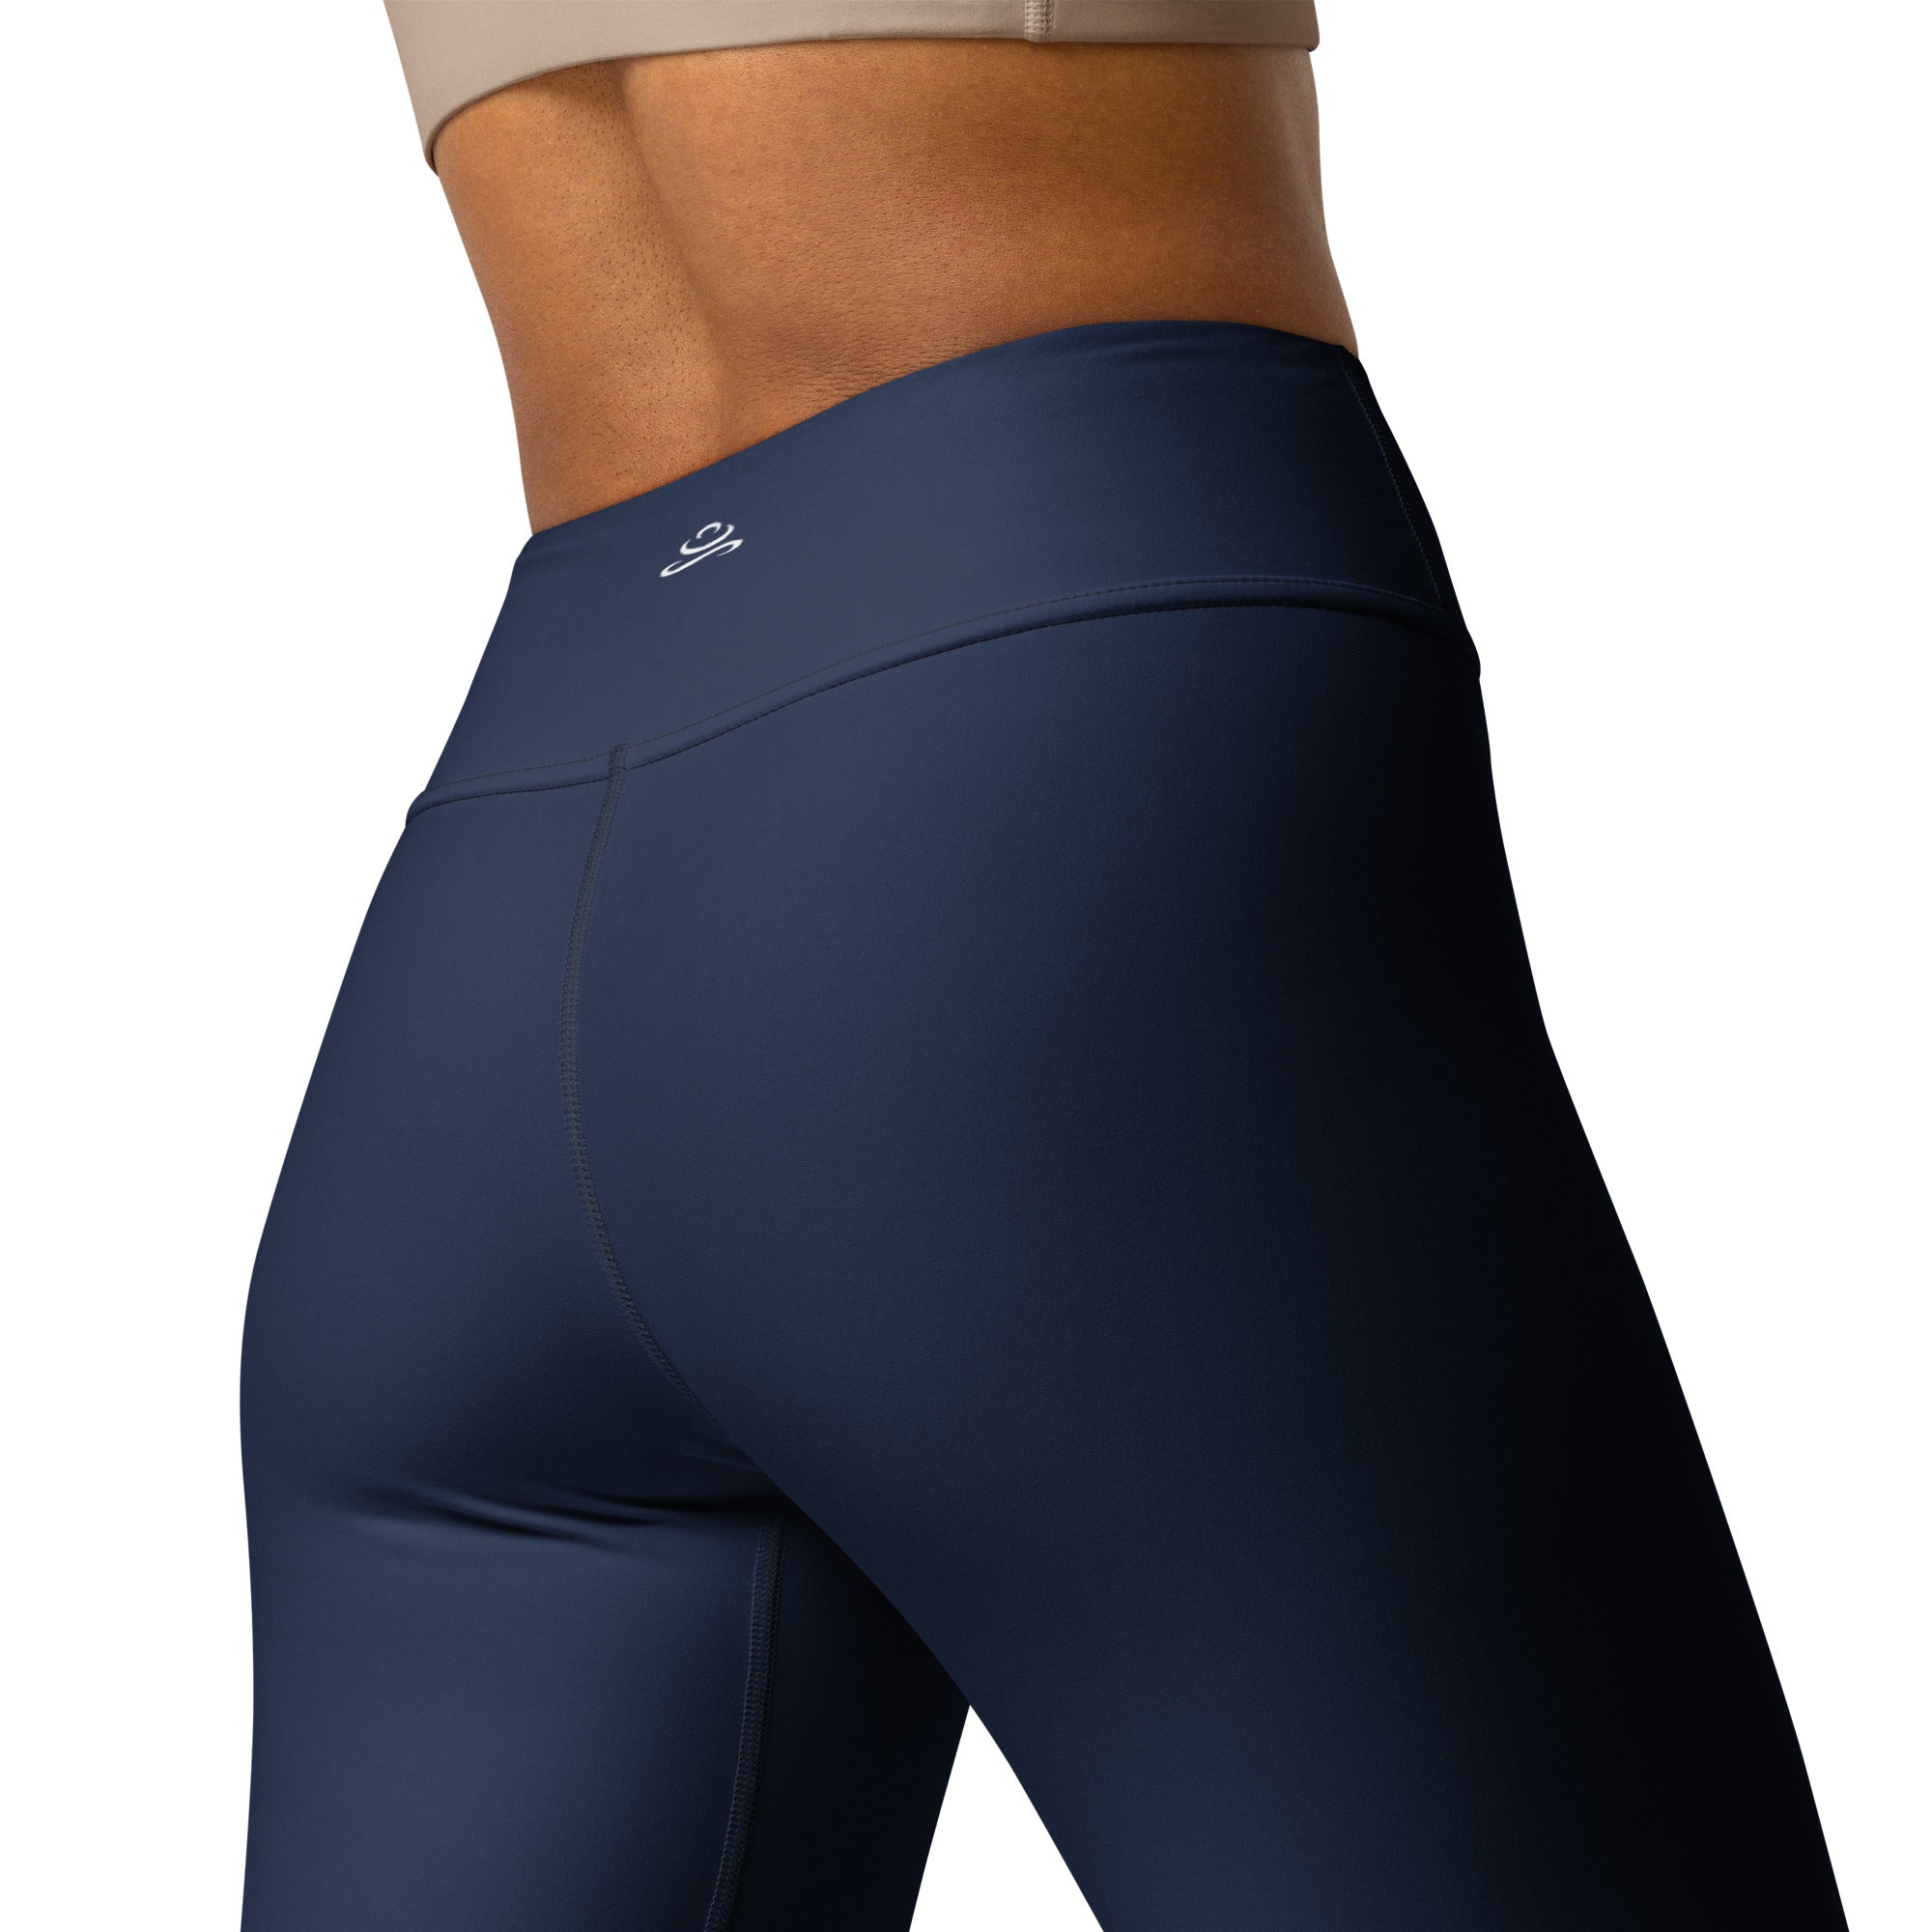 LifeSky High Waist Yoga Pants Workout Leggings for Women with Pockets Tummy  Control Soft Pants, M in Bahrain